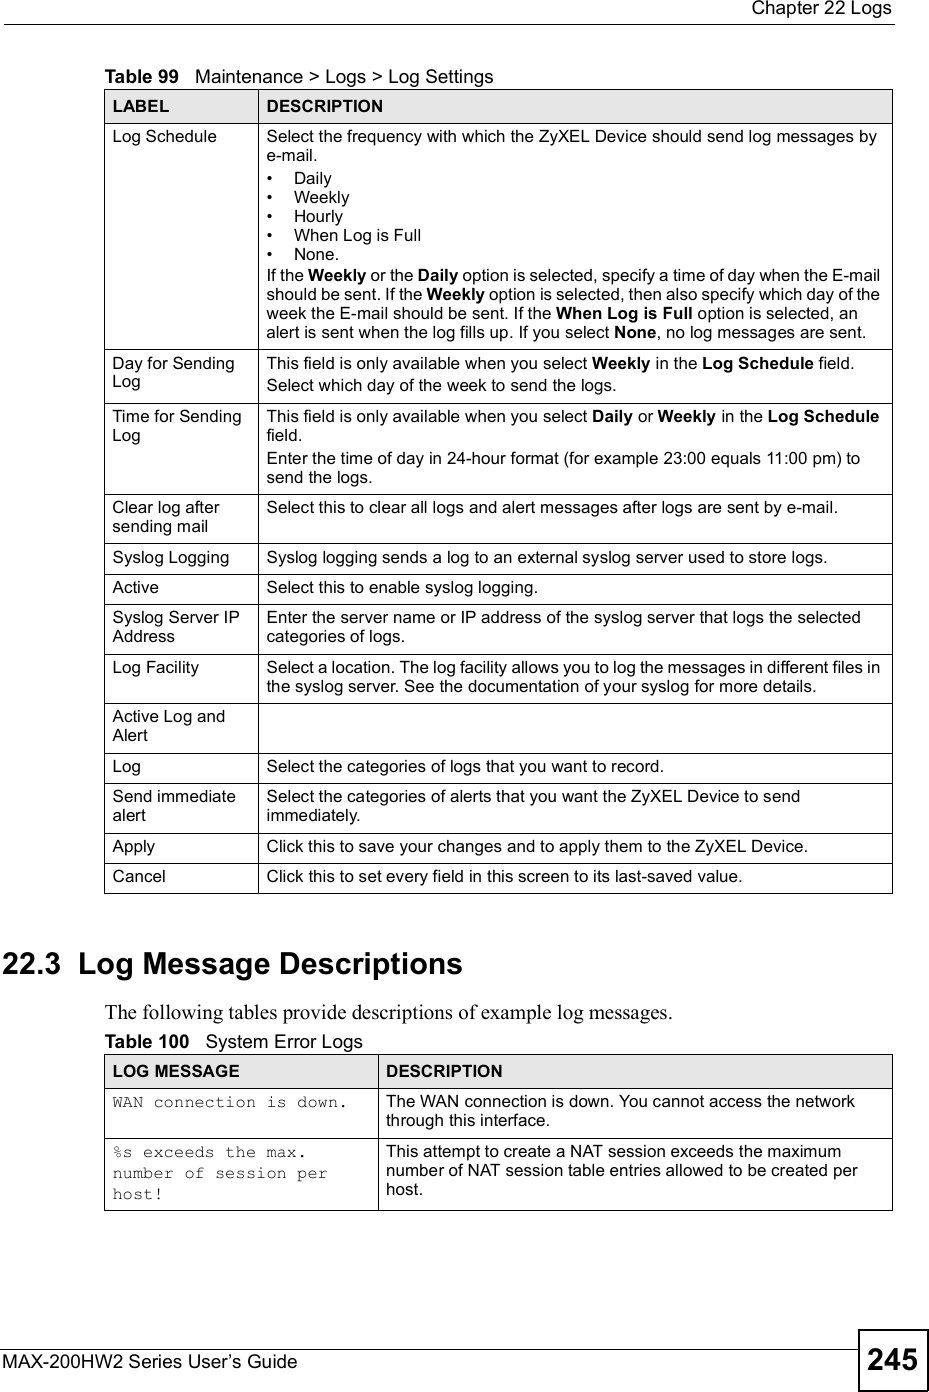  Chapter 22LogsMAX-200HW2 Series User s Guide 24522.3  Log Message DescriptionsThe following tables provide descriptions of example log messages.Log Schedule Select the frequency with which the ZyXEL Device should send log messages by e-mail.#Daily#Weekly#Hourly#When Log is Full#None. If the Weekly or the Daily option is selected, specify a time of day when the E-mail should be sent. If the Weekly option is selected, then also specify which day of the week the E-mail should be sent. If the When Log is Full option is selected, an alert is sent when the log fills up. If you select None, no log messages are sent.Day for Sending LogThis field is only available when you select Weekly in the Log Schedule field.Select which day of the week to send the logs.Time for Sending LogThis field is only available when you select Daily or Weekly in the Log Schedulefield.Enter the time of day in 24-hour format (for example 23:00 equals 11:00 pm) to send the logs.Clear log after sending mailSelect this to clear all logs and alert messages after logs are sent by e-mail.Syslog Logging Syslog logging sends a log to an external syslog server used to store logs.Active Select this to enable syslog logging.Syslog Server IP AddressEnter the server name or IP address of the syslog server that logs the selected categories of logs.Log Facility Select a location. The log facility allows you to log the messages in different files in the syslog server. See the documentation of your syslog for more details.Active Log and AlertLog Select the categories of logs that you want to record. Send immediate alertSelect the categories of alerts that you want the ZyXEL Device to send immediately.Apply Click this to save your changes and to apply them to the ZyXEL Device.Cancel Click this to set every field in this screen to its last-saved value.Table 99   Maintenance &gt; Logs &gt; Log SettingsLABEL DESCRIPTIONTable 100   System Error LogsLOG MESSAGE DESCRIPTIONWAN connection is down. The WAN connection is down. You cannot access the network through this interface.%s exceeds the max. number of session per host!This attempt to create a NAT session exceeds the maximum number of NAT session table entries allowed to be created per host.